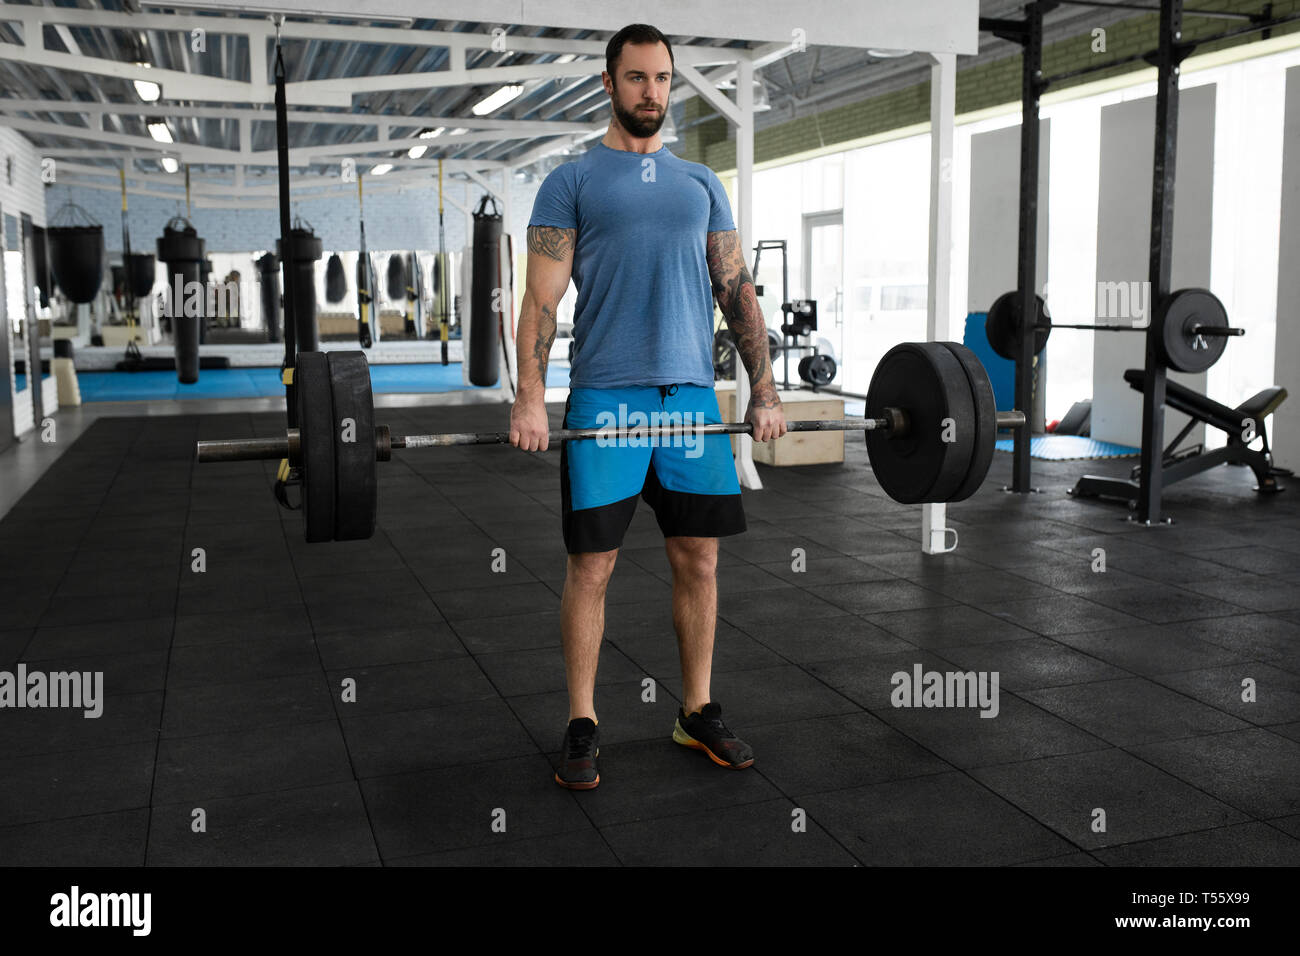 Mid adult man weight lifting in gym Stock Photo